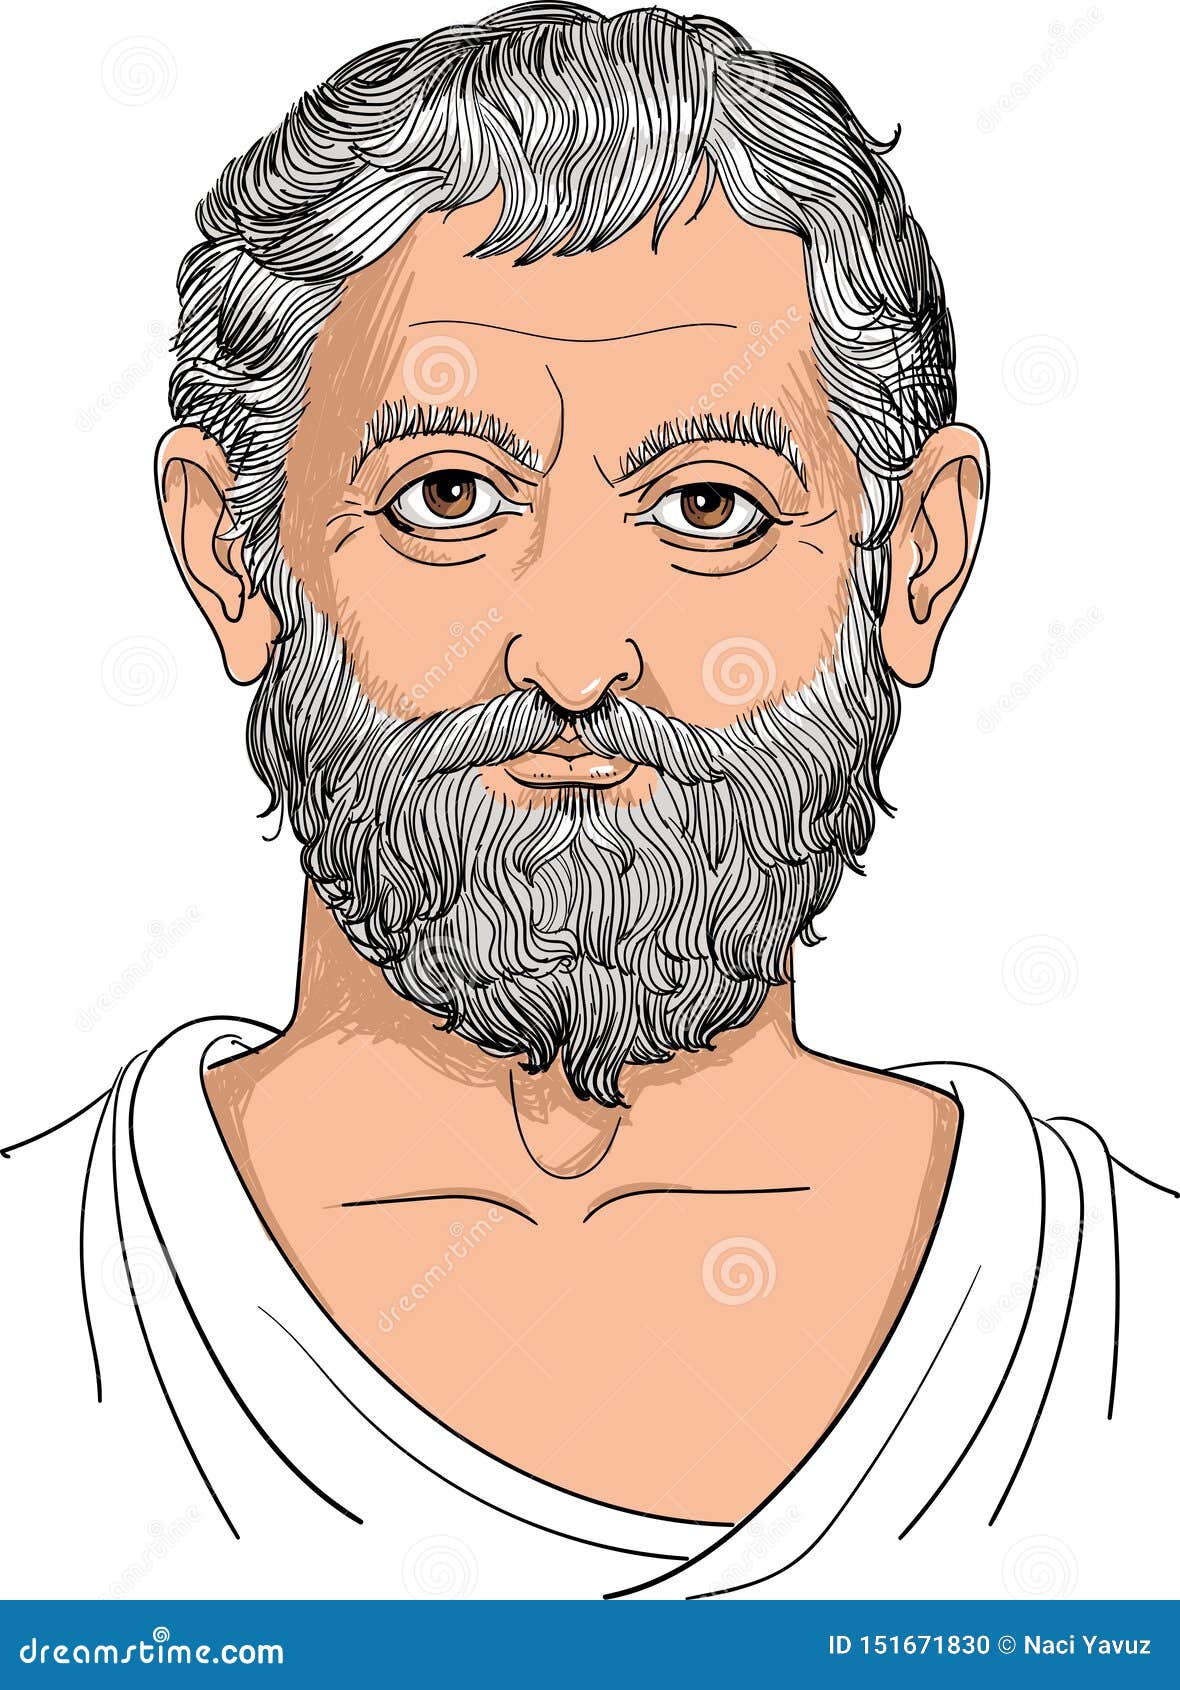 Thales of Miletus Portrait, Vector Stock Vector - Illustration of classic,  graphic: 151671830